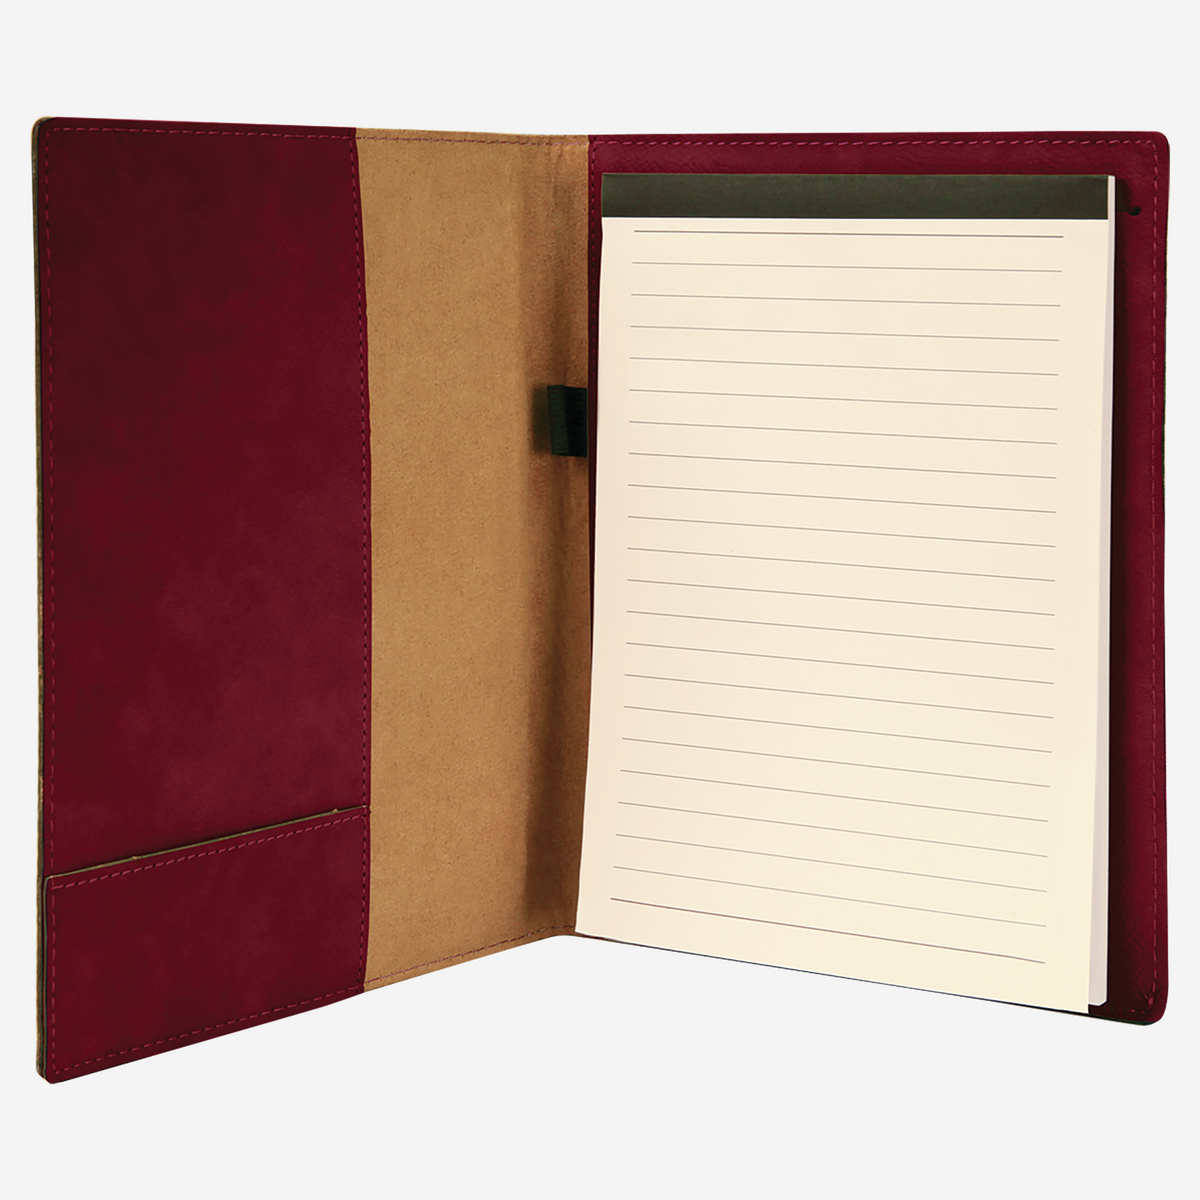 7" x 9" Laserable Rose Leatherette Small Portfolio with Notepad open view left side pocket and right side notepad